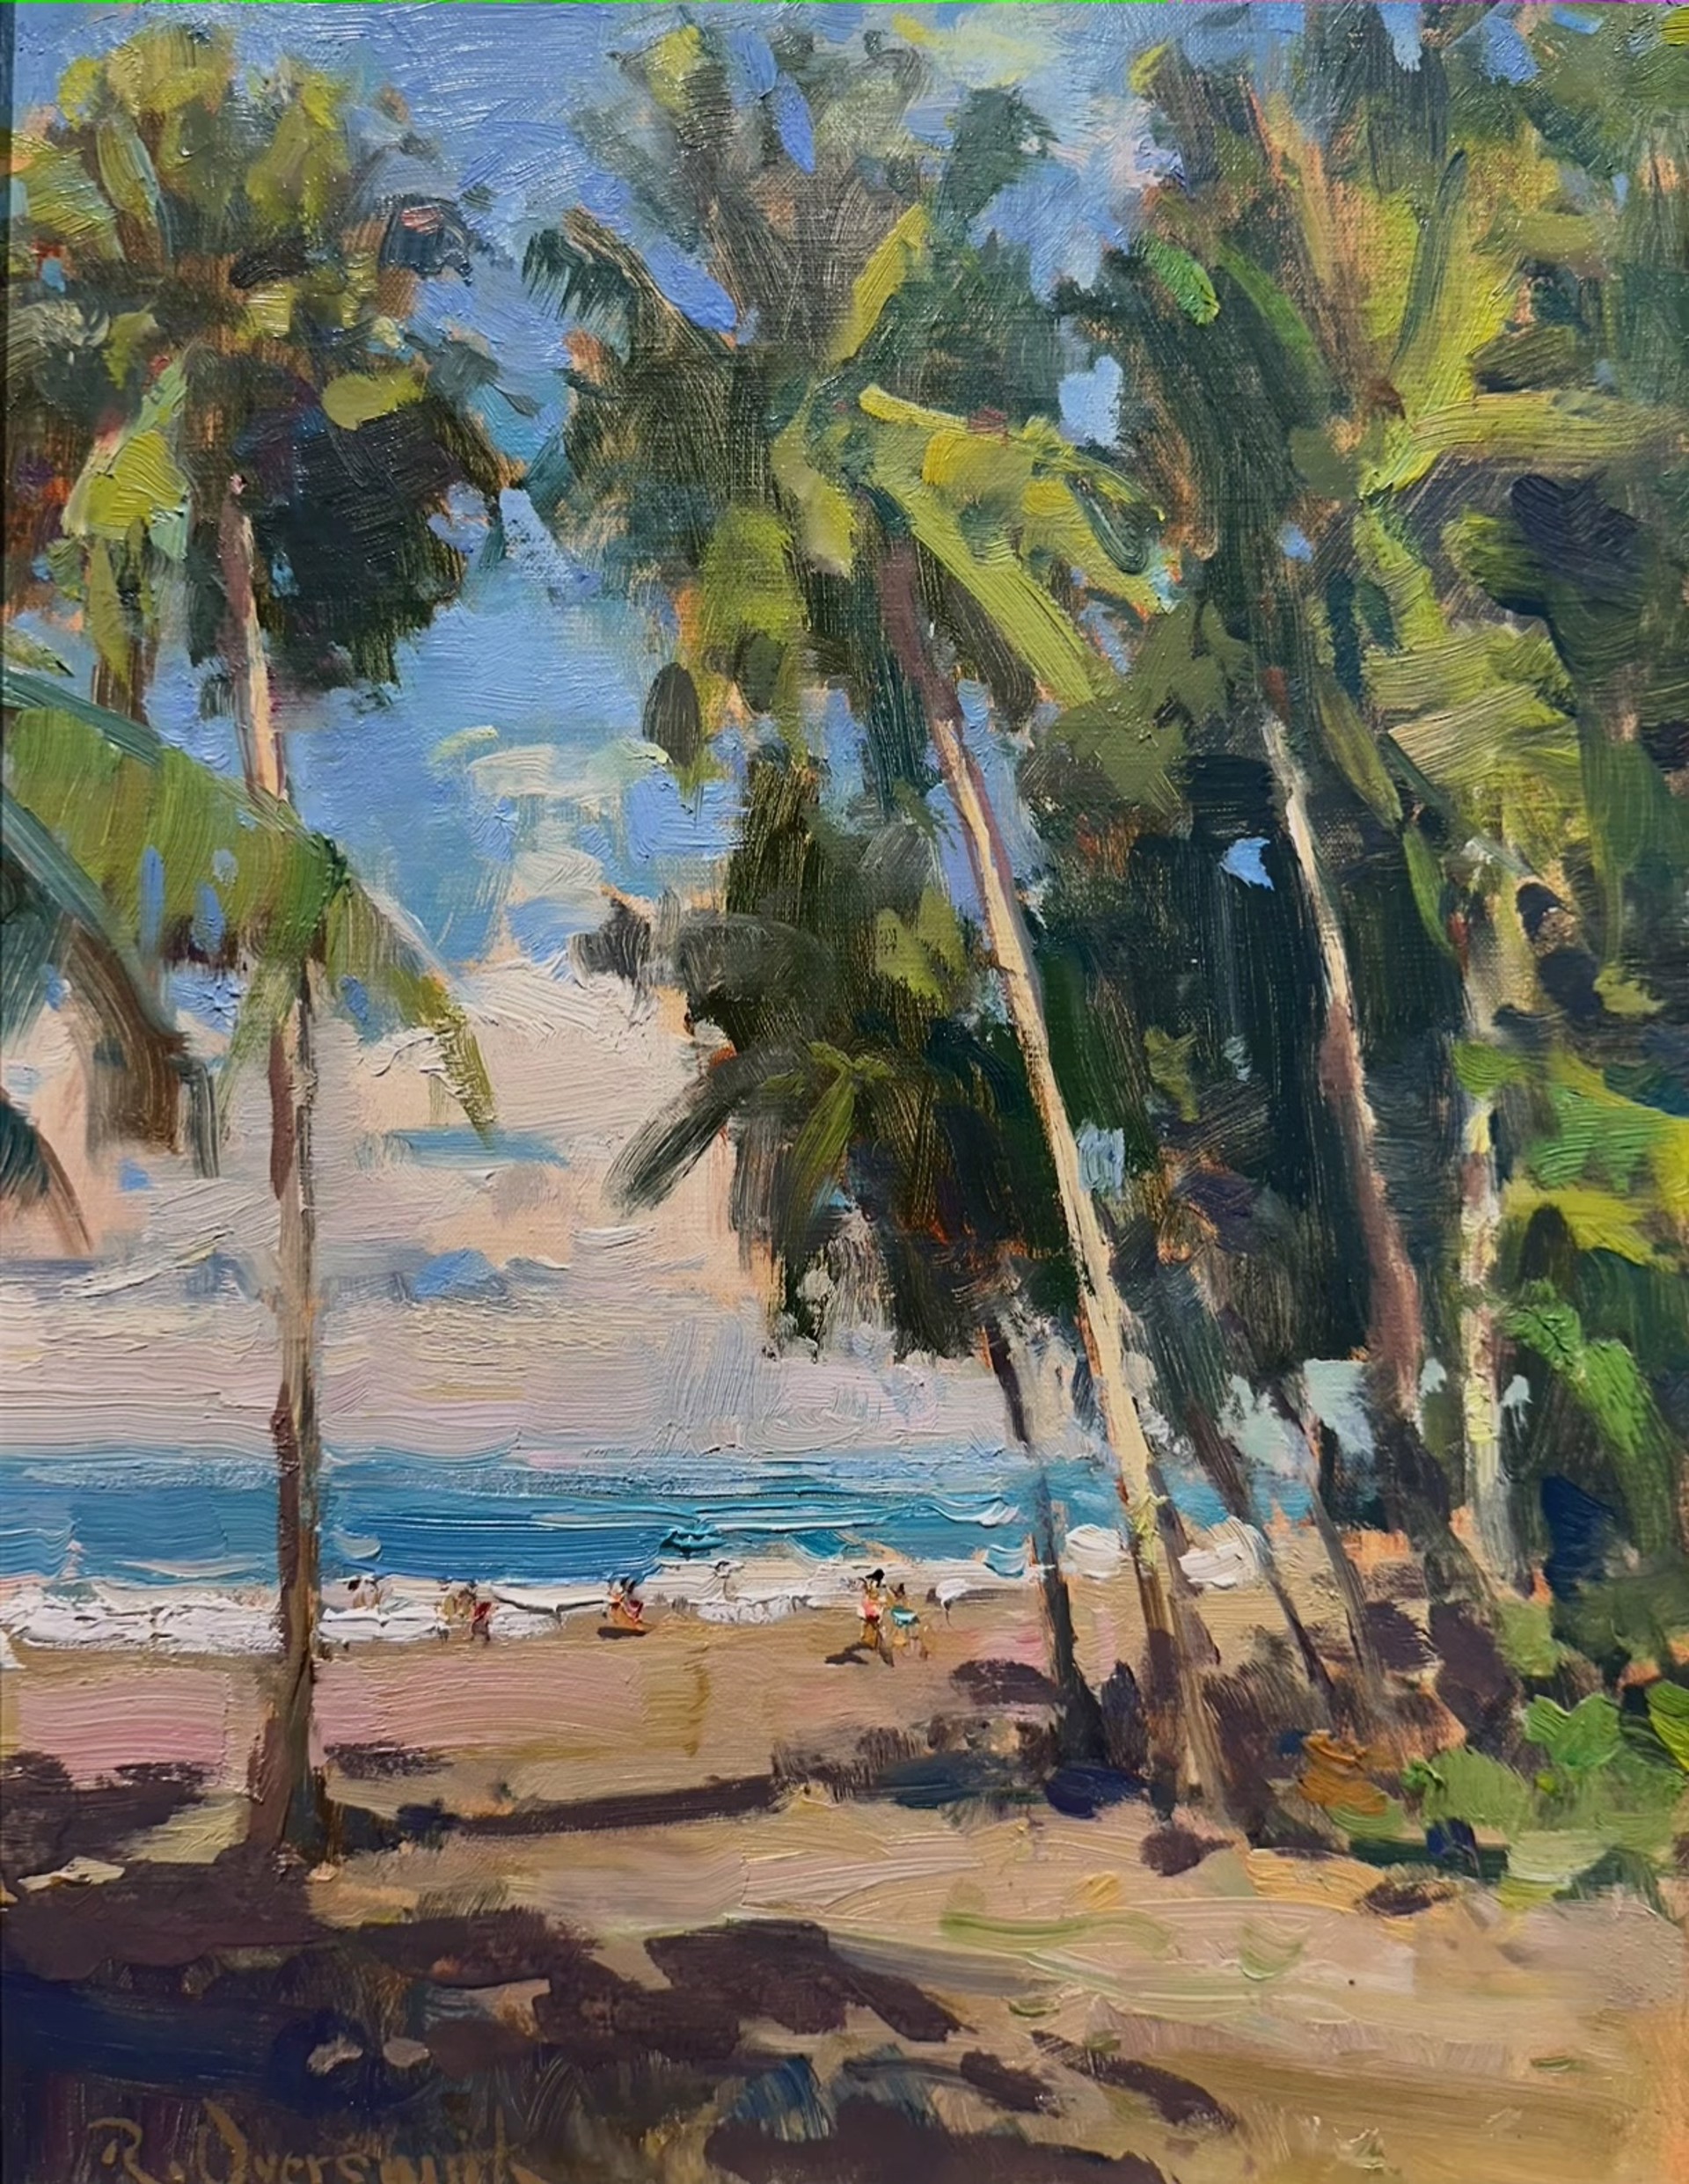 View Through the Palms by Richard Oversmith